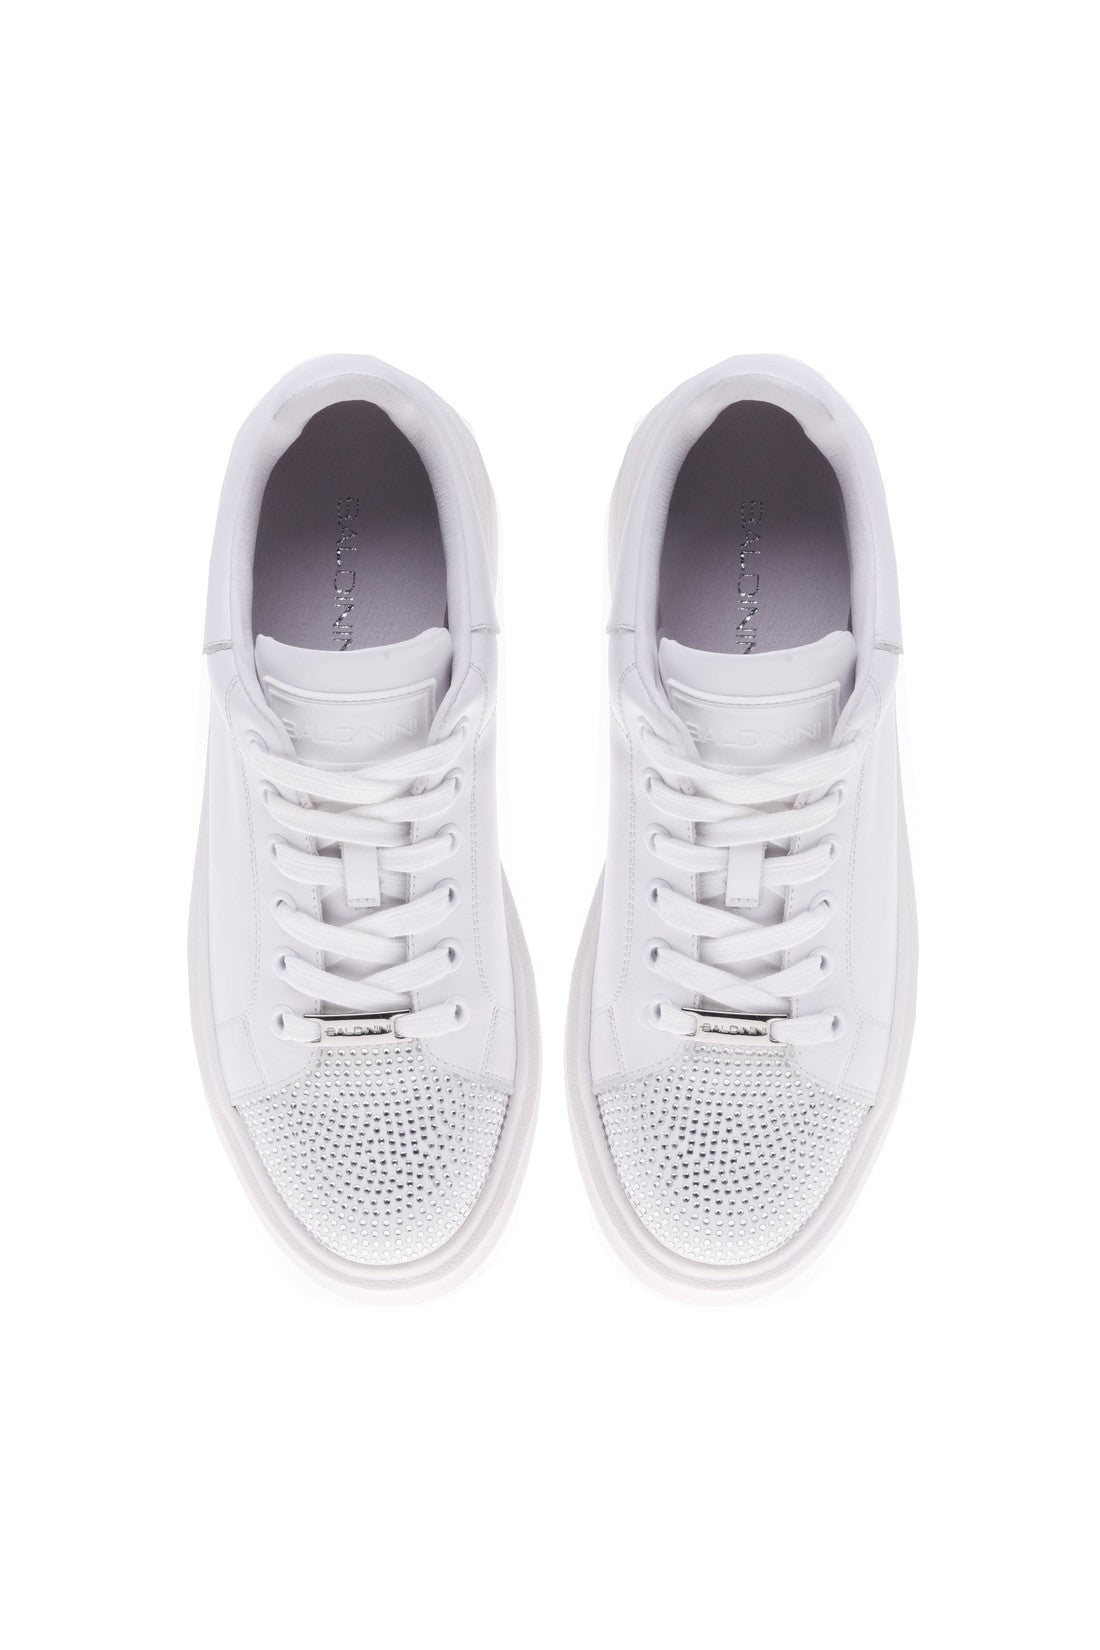 BALDININI-OUTLET-SALE-Sneaker-in-white-calfskin-with-rhinestones-Sneaker-ARCHIVE-COLLECTION-2.jpg